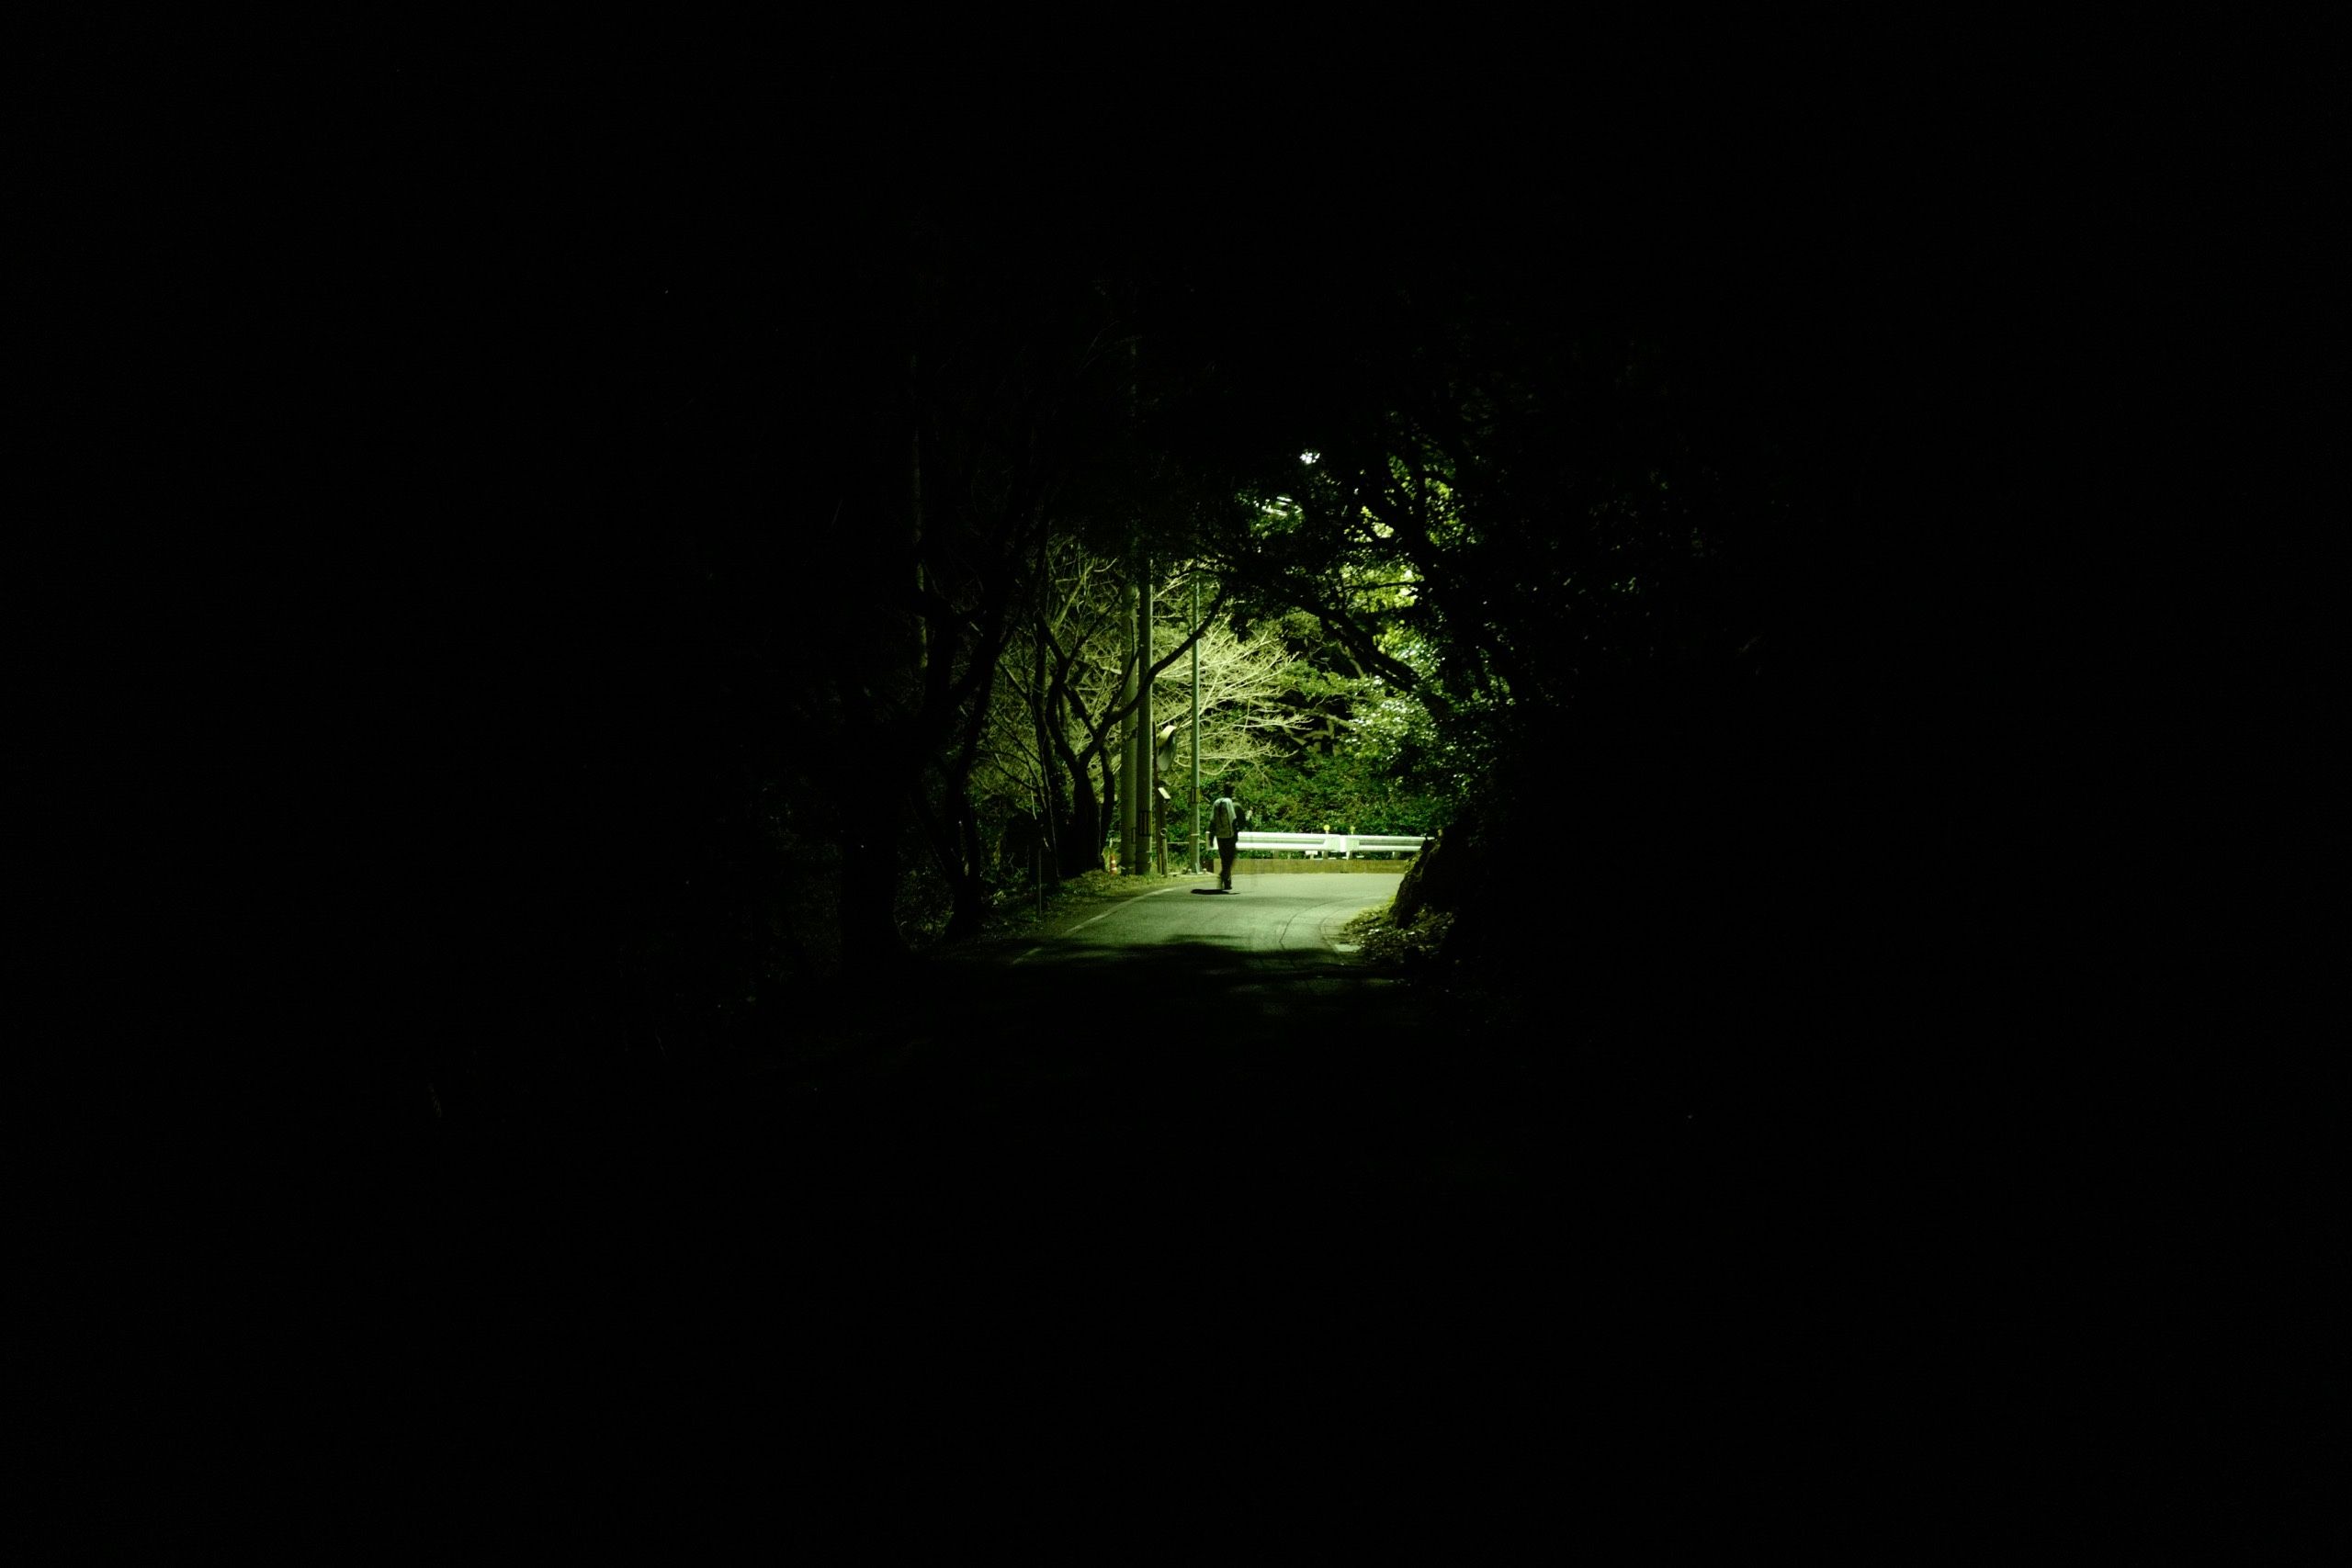 A man carrying a rucksack walks on a road in the distance at night